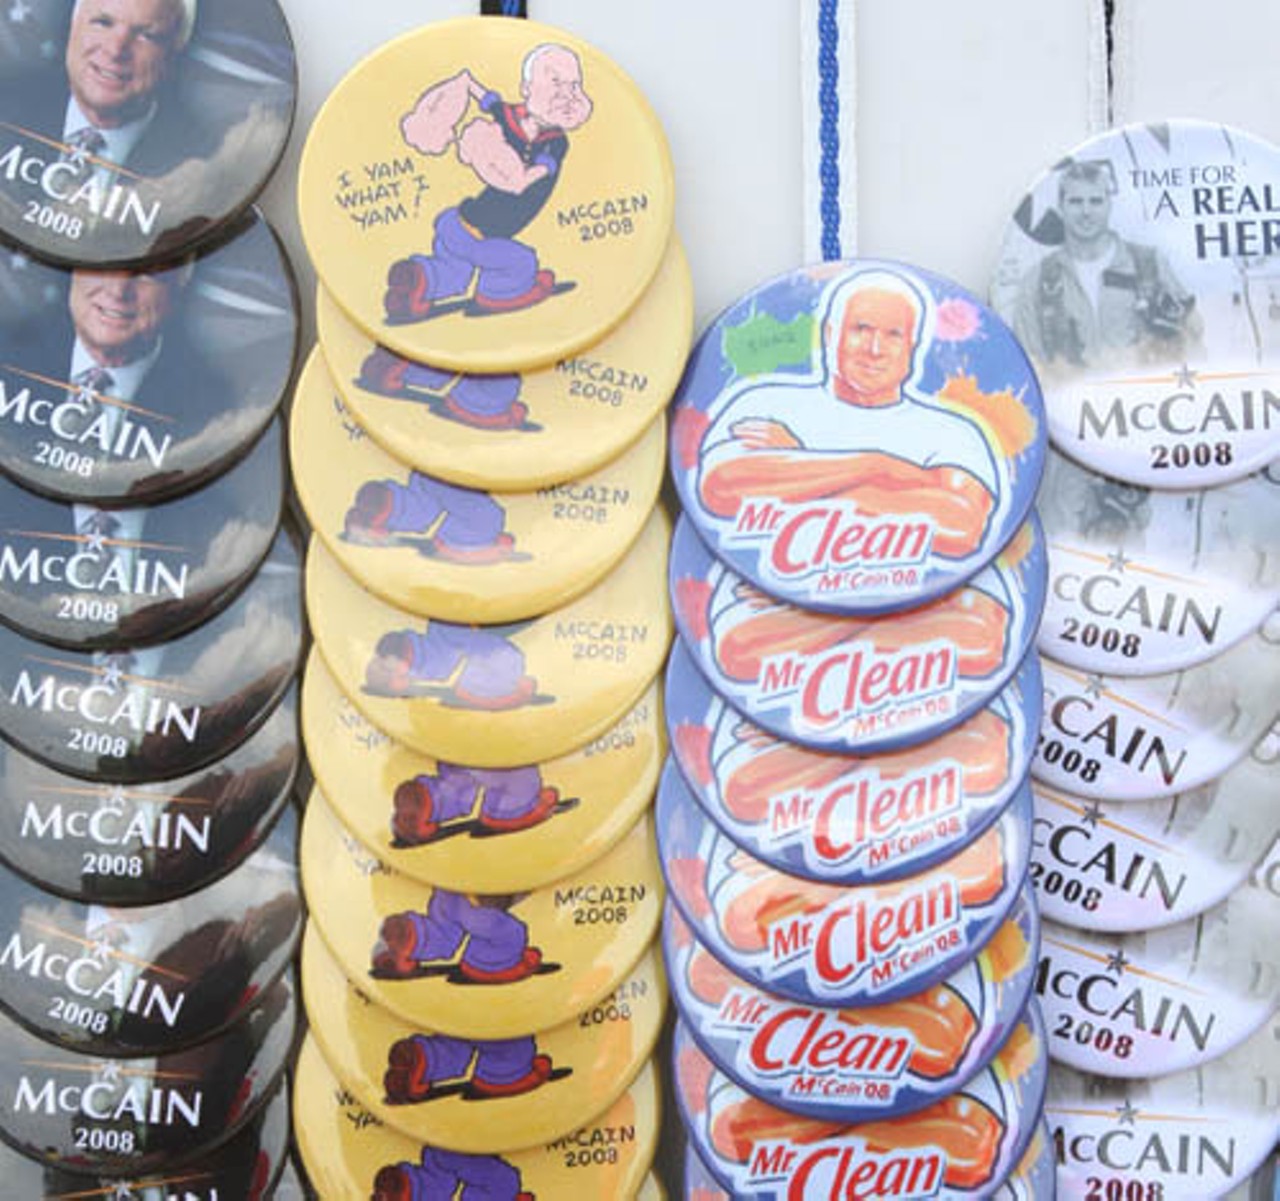 Many souvenirs were available for McCain supporters, including buttons incorporating McCain as Popeye and Mr. Clean.